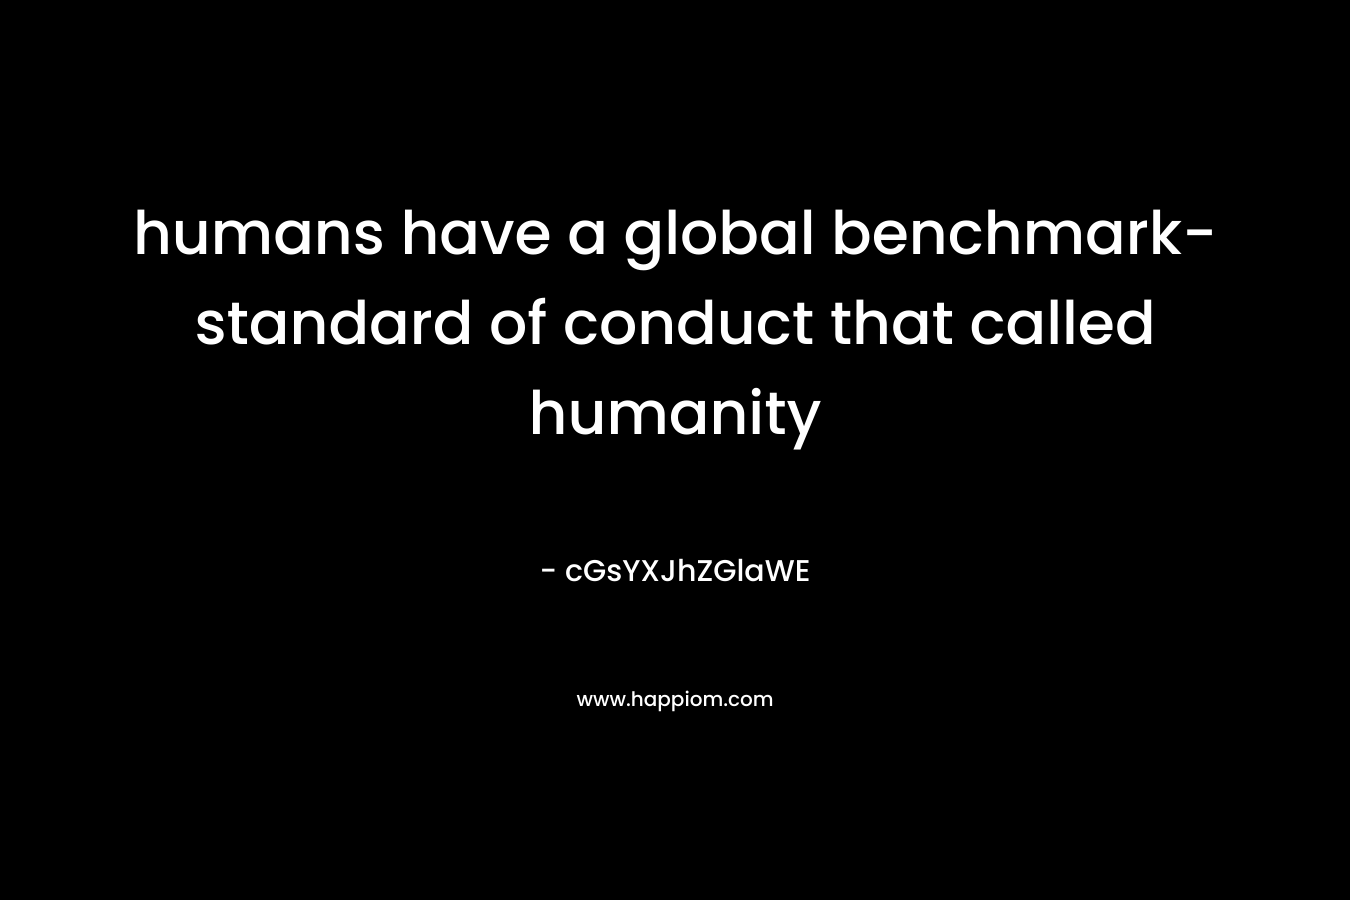 humans have a global benchmark-standard of conduct that called humanity